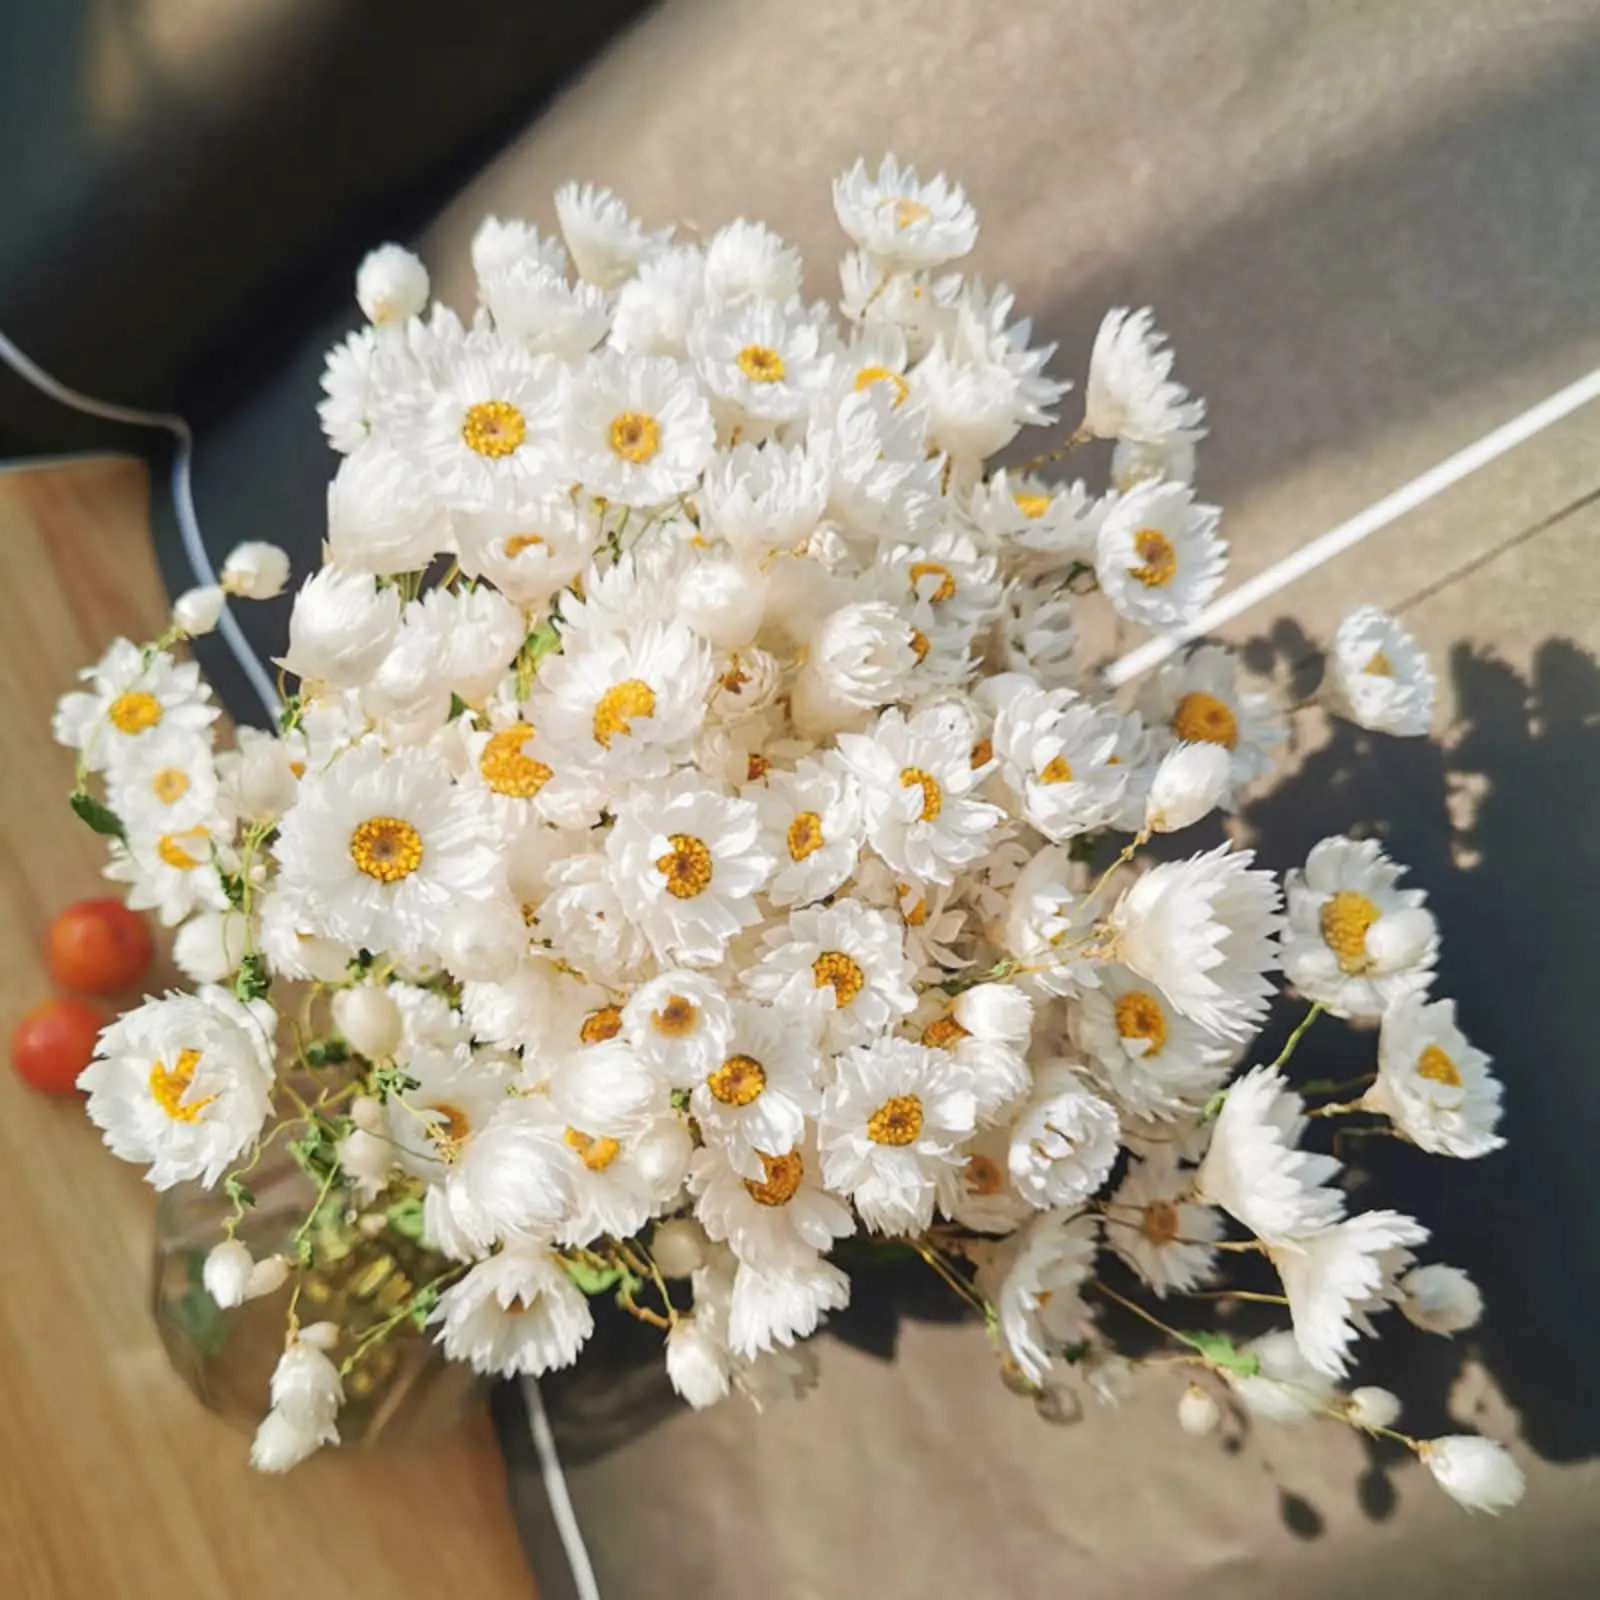 

Dried Daisy Flowers Bouquet,Real Dry White Flower,Gerber Daisies Arrangements for Wedding,Farmhouse Decorations,DIY Home Decor